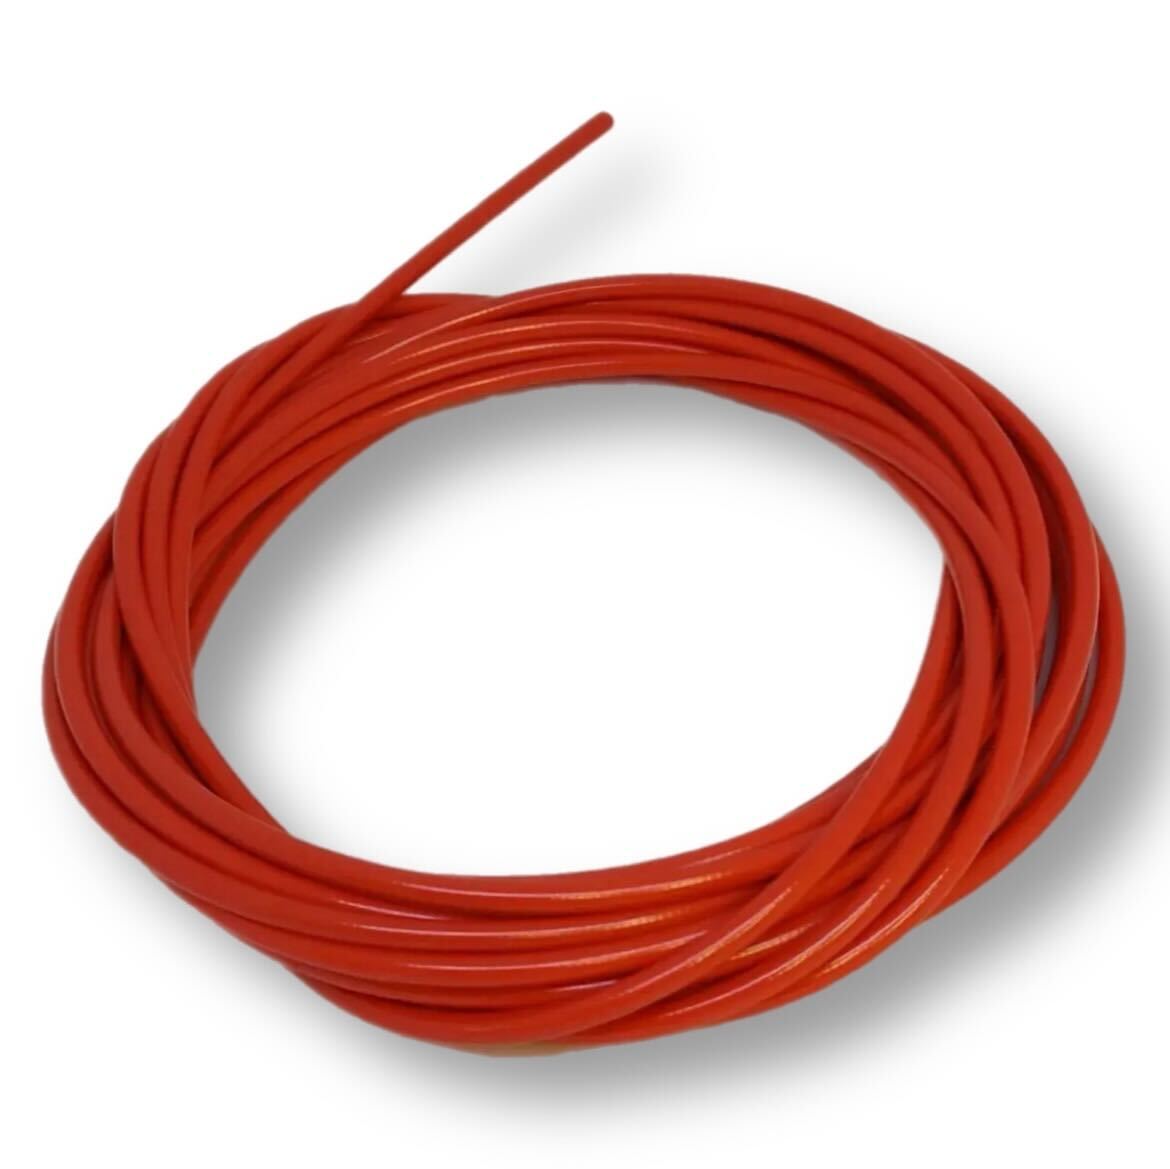 Scooter Motorbike Bike Teflon Lined Cable Outer 5mm Red - Sold Per Metre